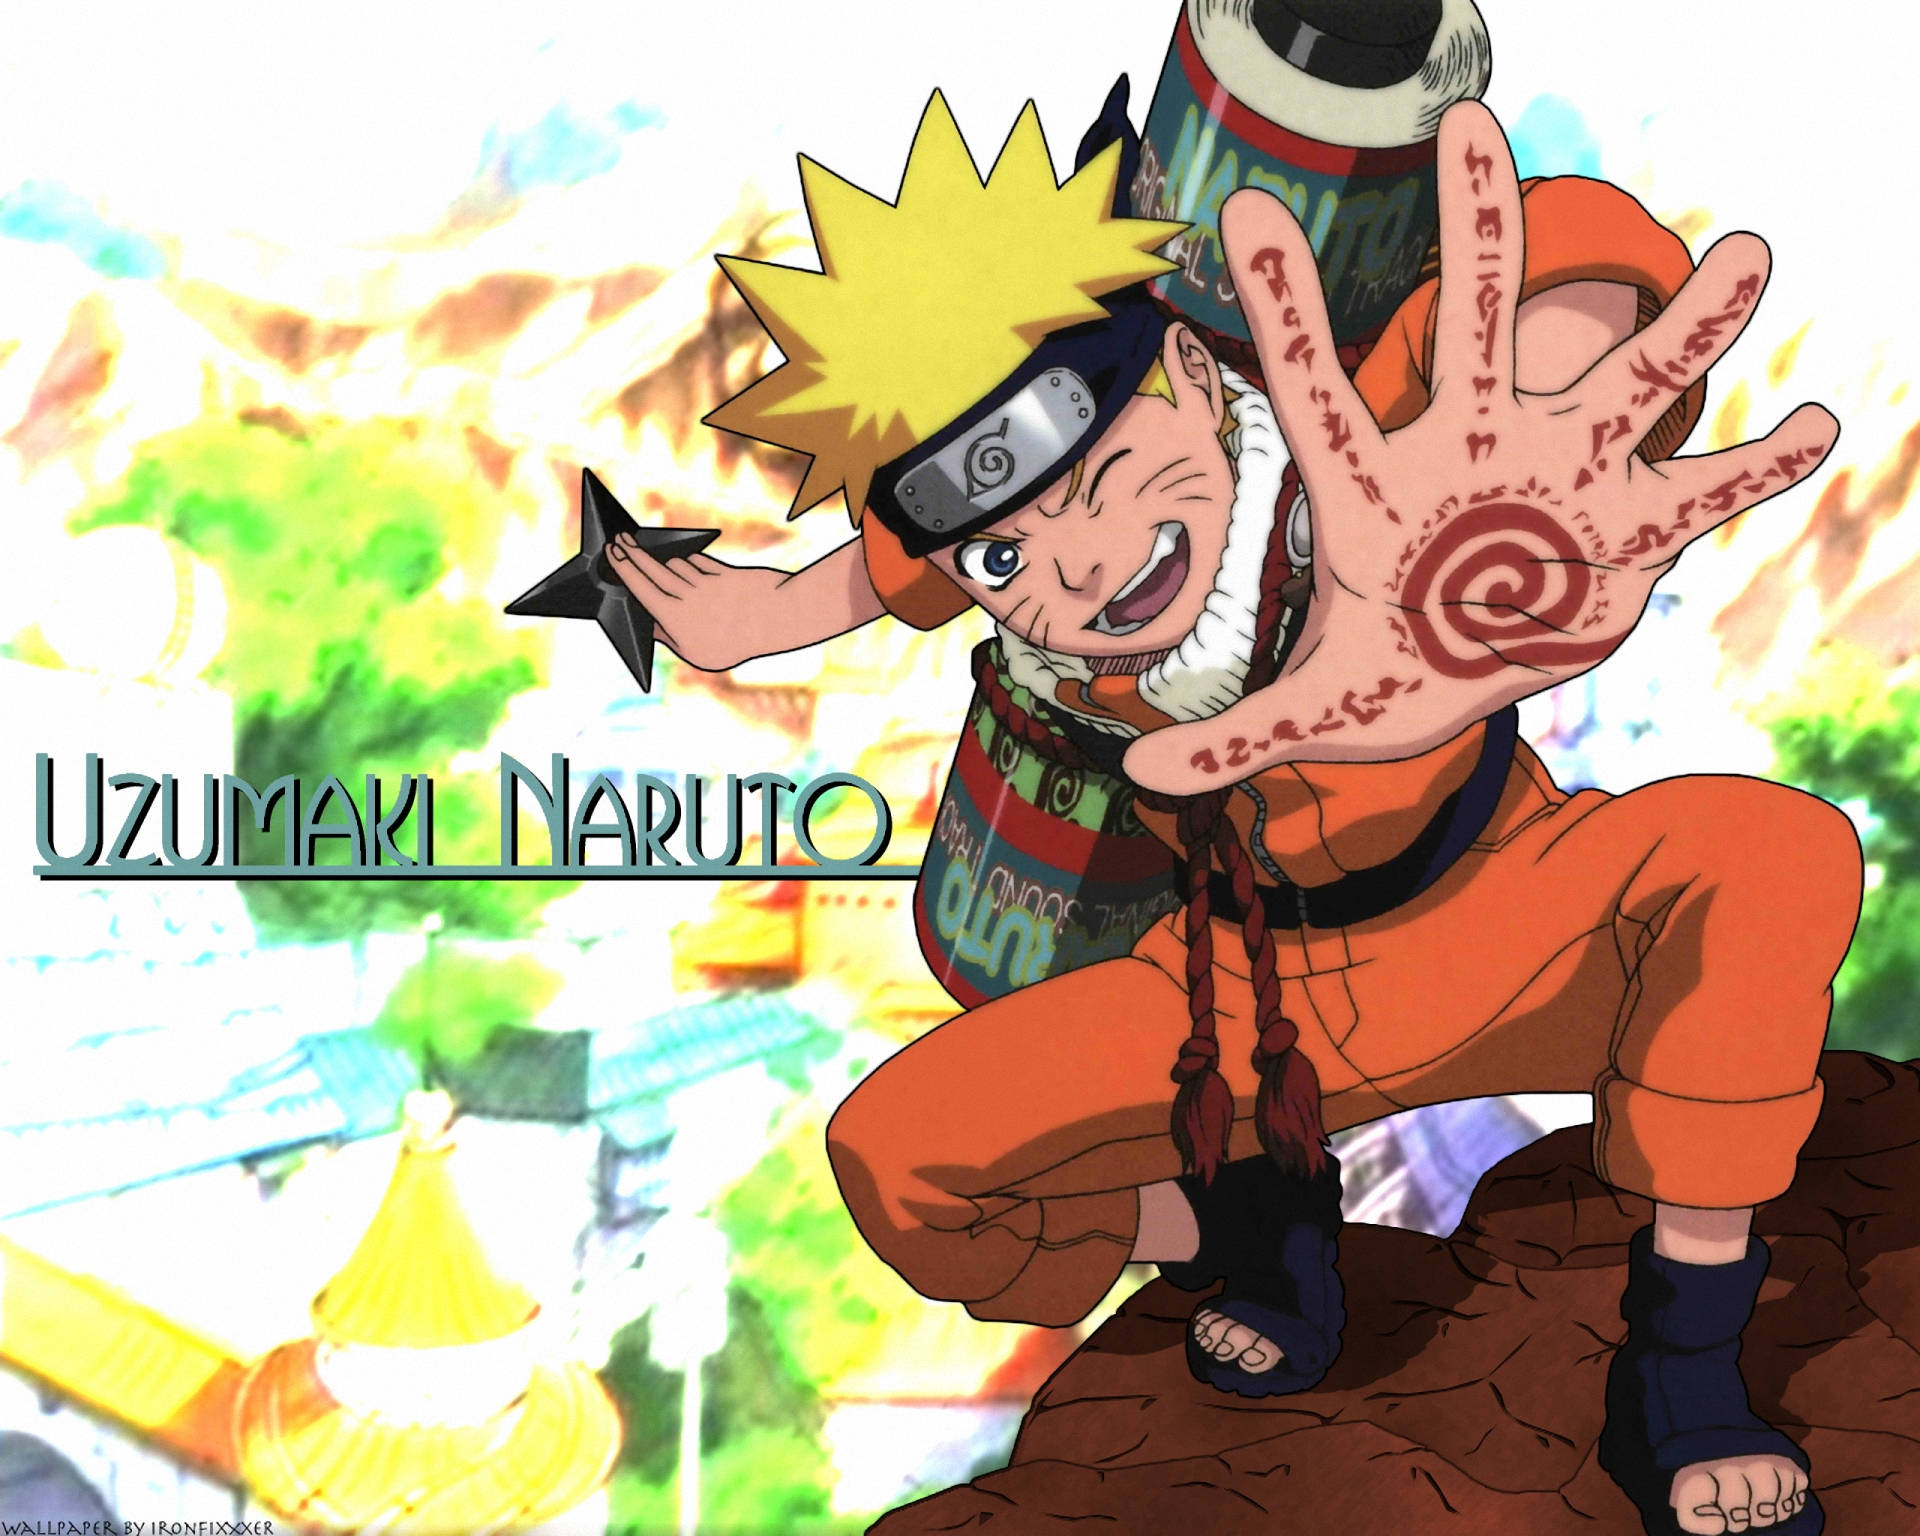 Moving Naruto Hand Spiral Seal Background